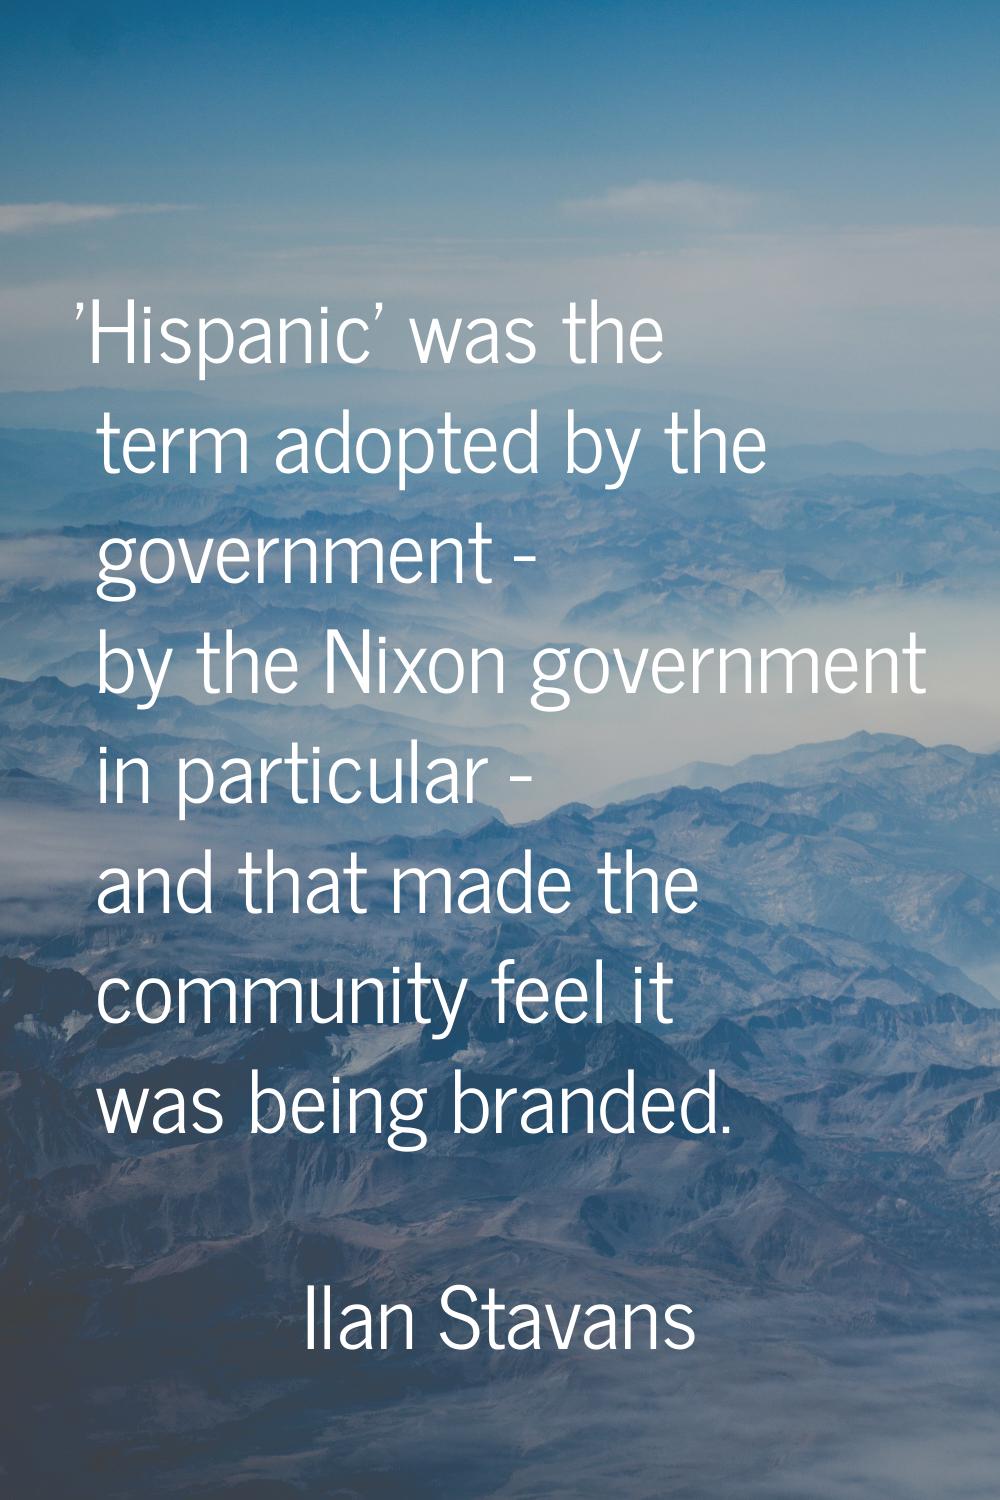 'Hispanic' was the term adopted by the government - by the Nixon government in particular - and tha